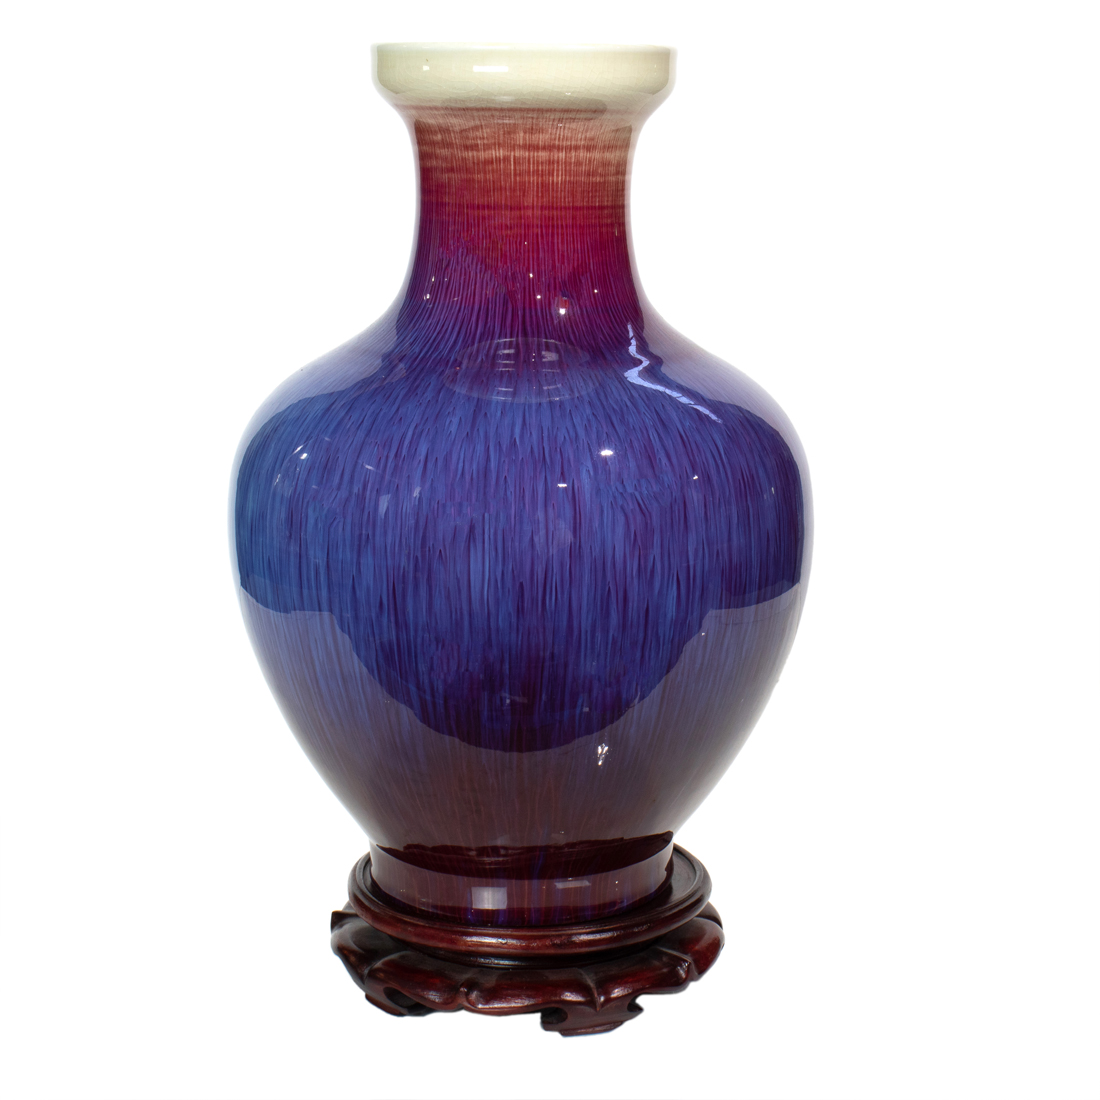 CHINESE FLAMBE GLAZED VASE Chinese 3a24a6